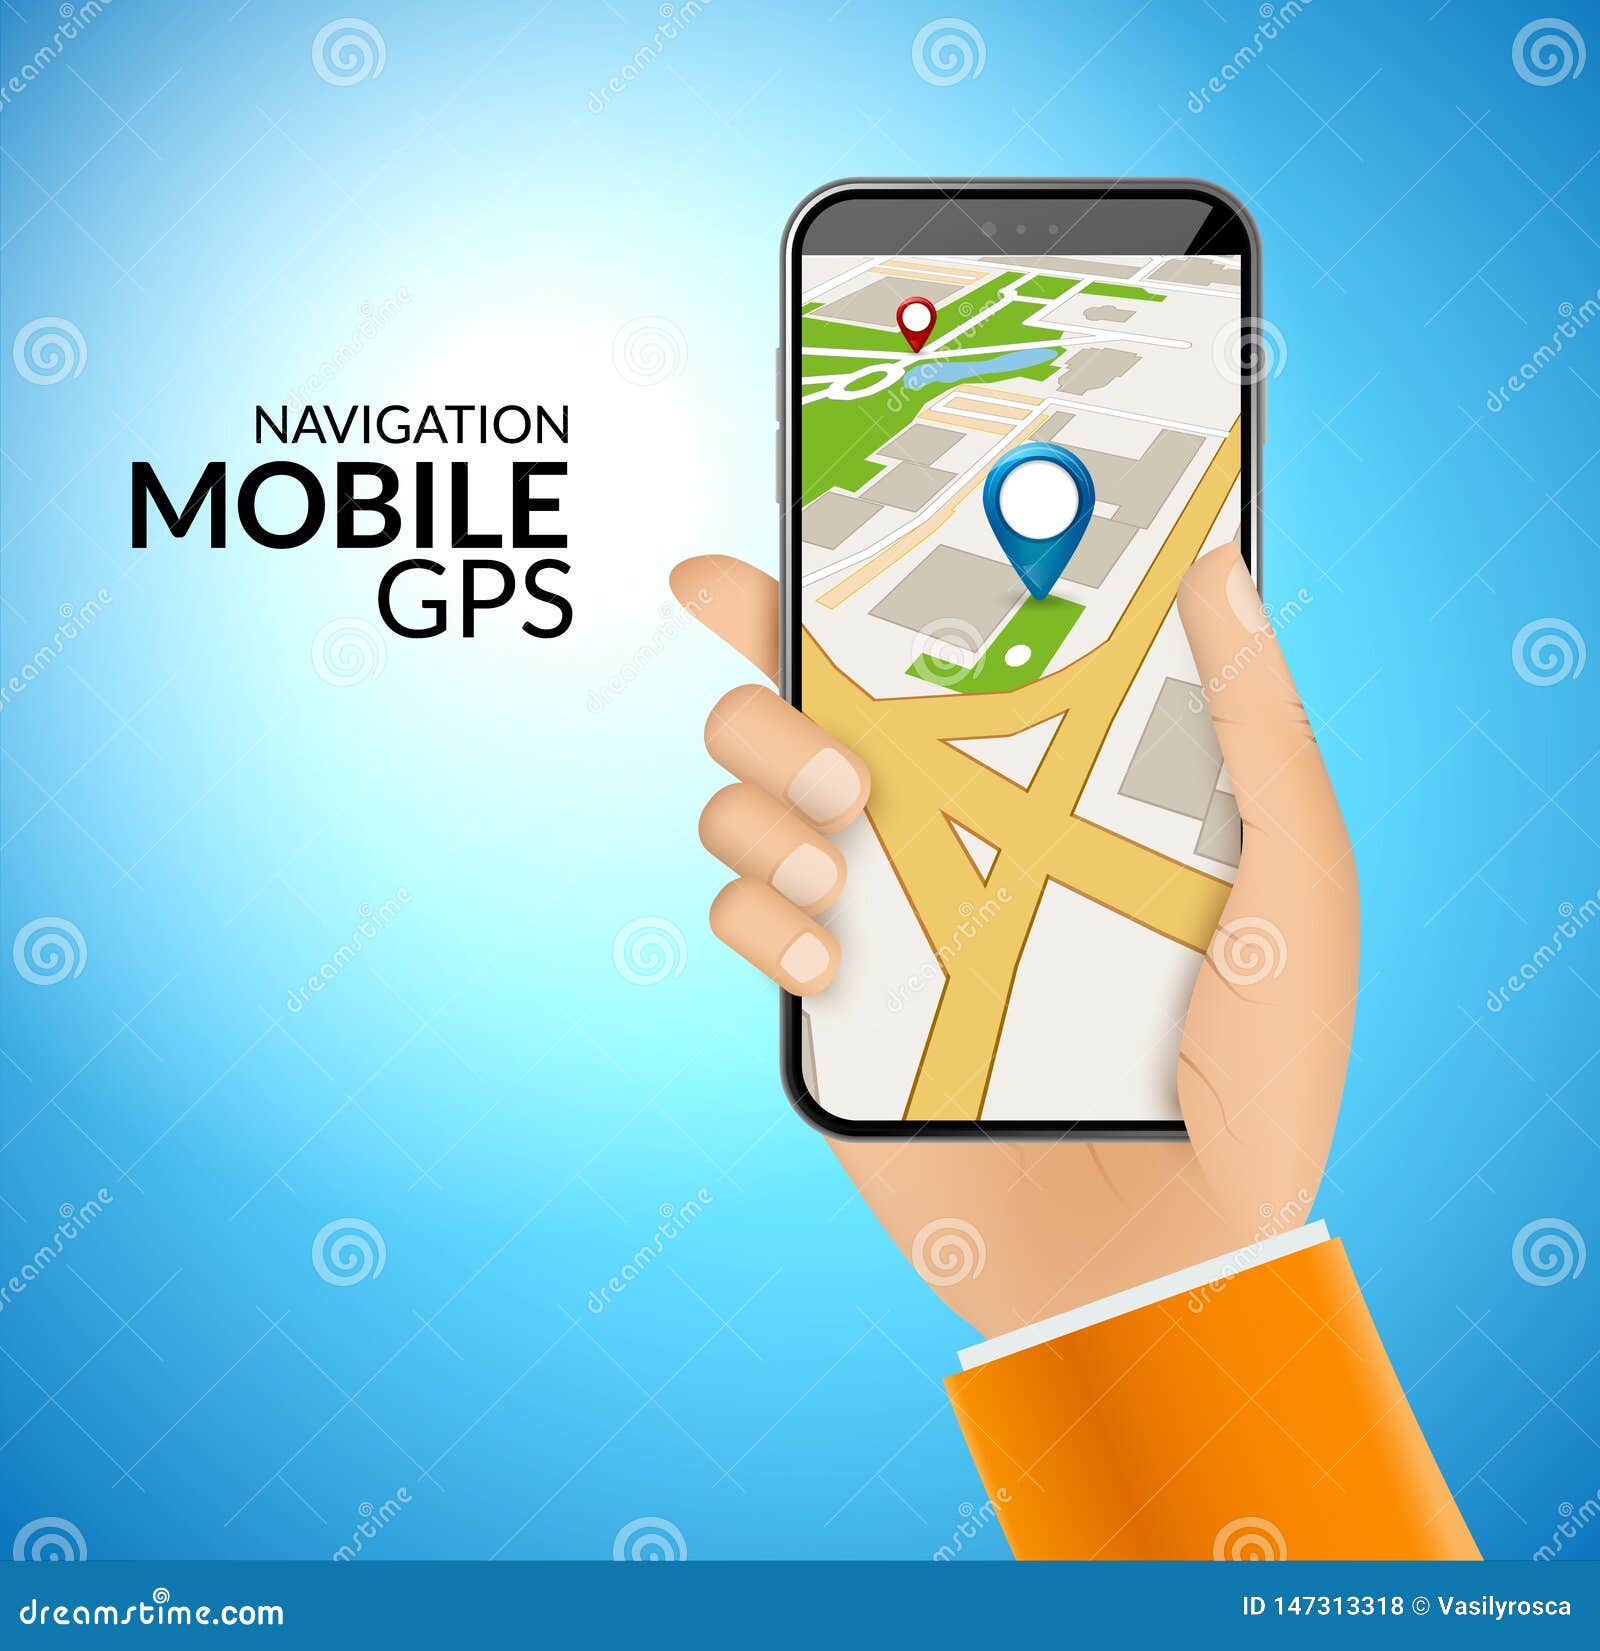 Mobile GPS Navigation Application. Map Vector Application City Gps Route Smartphone App Stock Vector - Illustration of pointer, infographic: 147313318